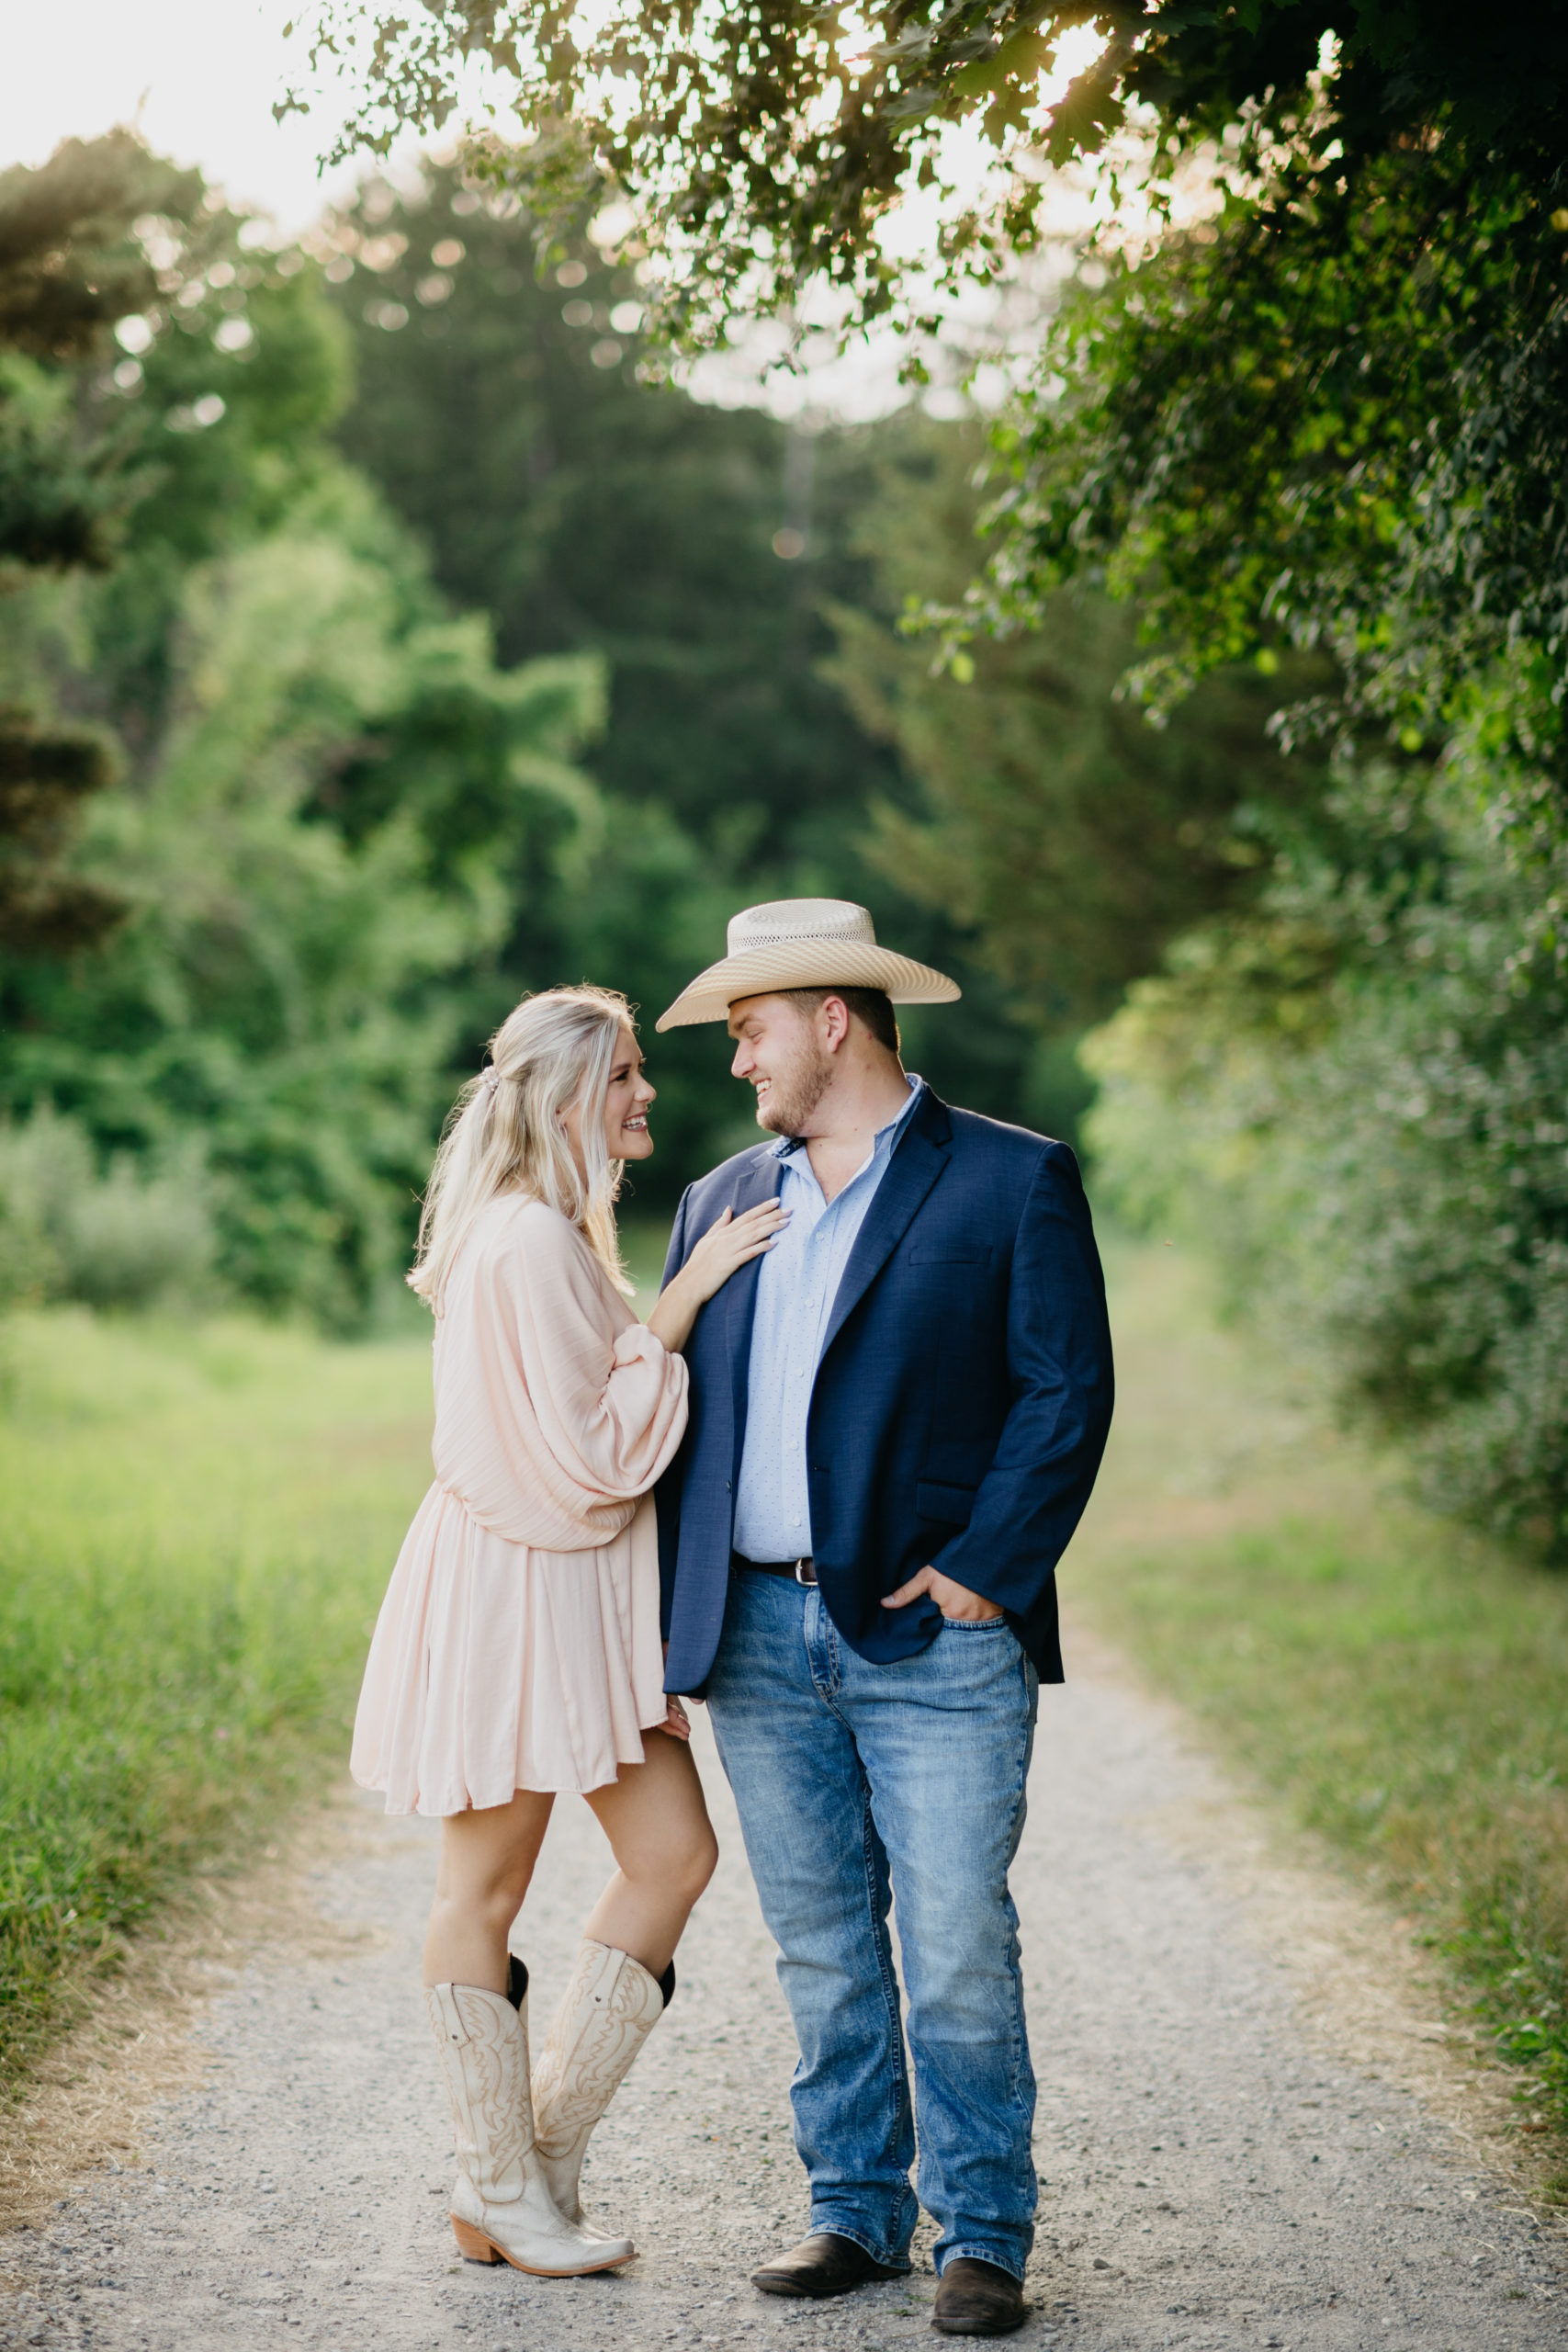 If there's a time of the year where I love sessions the most, it would be right now! Hannah & Quinn's summer sunset Stony Creek Metropark engagement was beyond anything I could've hoped for for them!